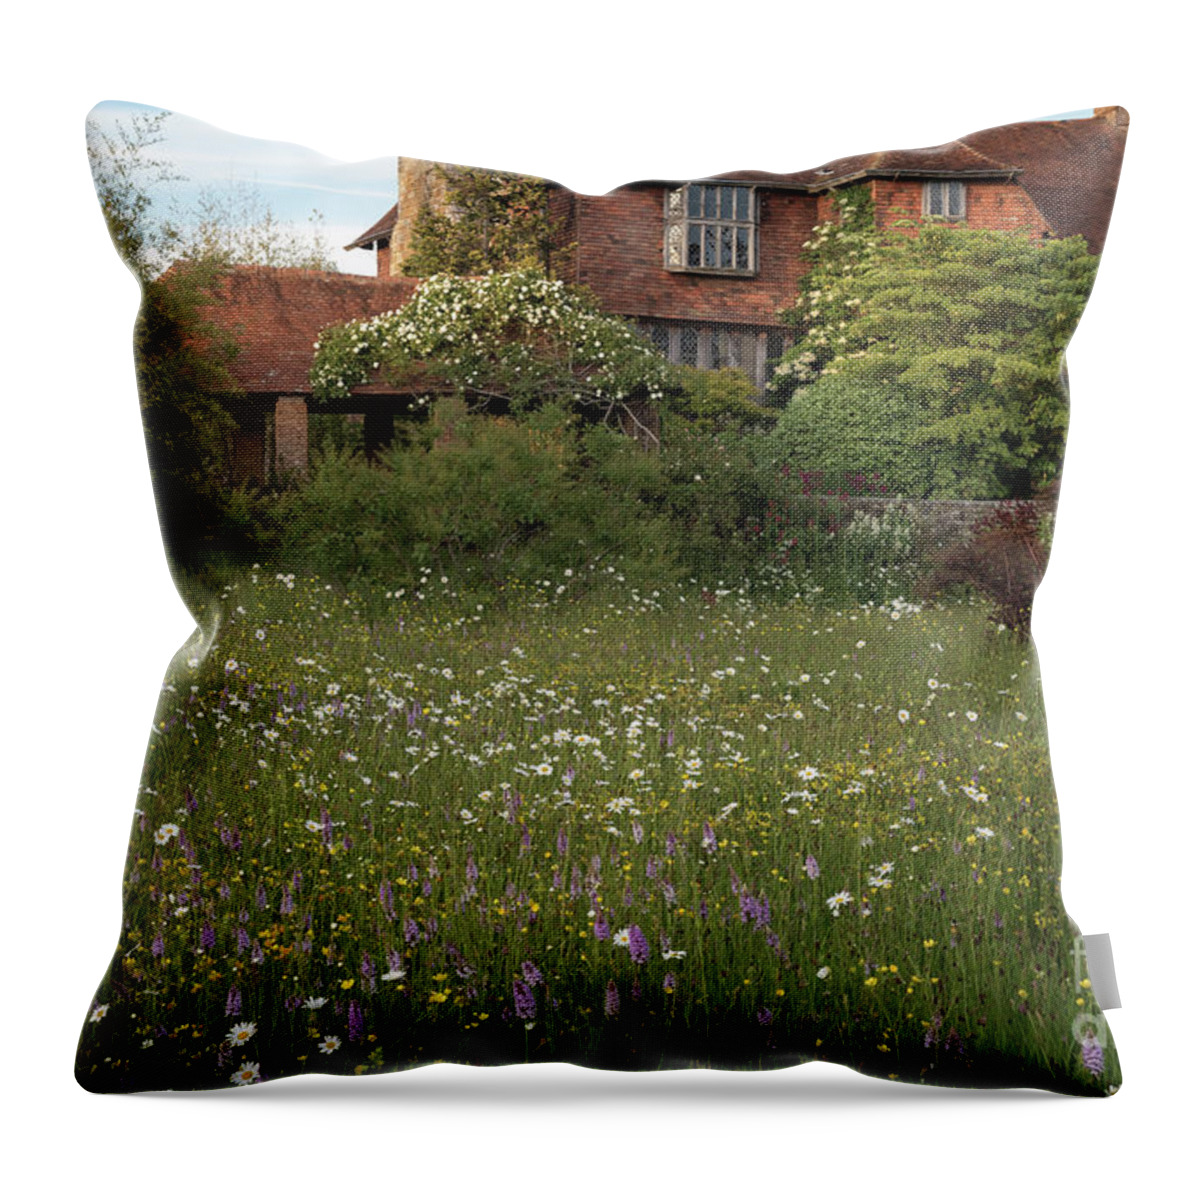 Wildflower Throw Pillow featuring the photograph Wildflower Meadow, Great Dixter by Perry Rodriguez